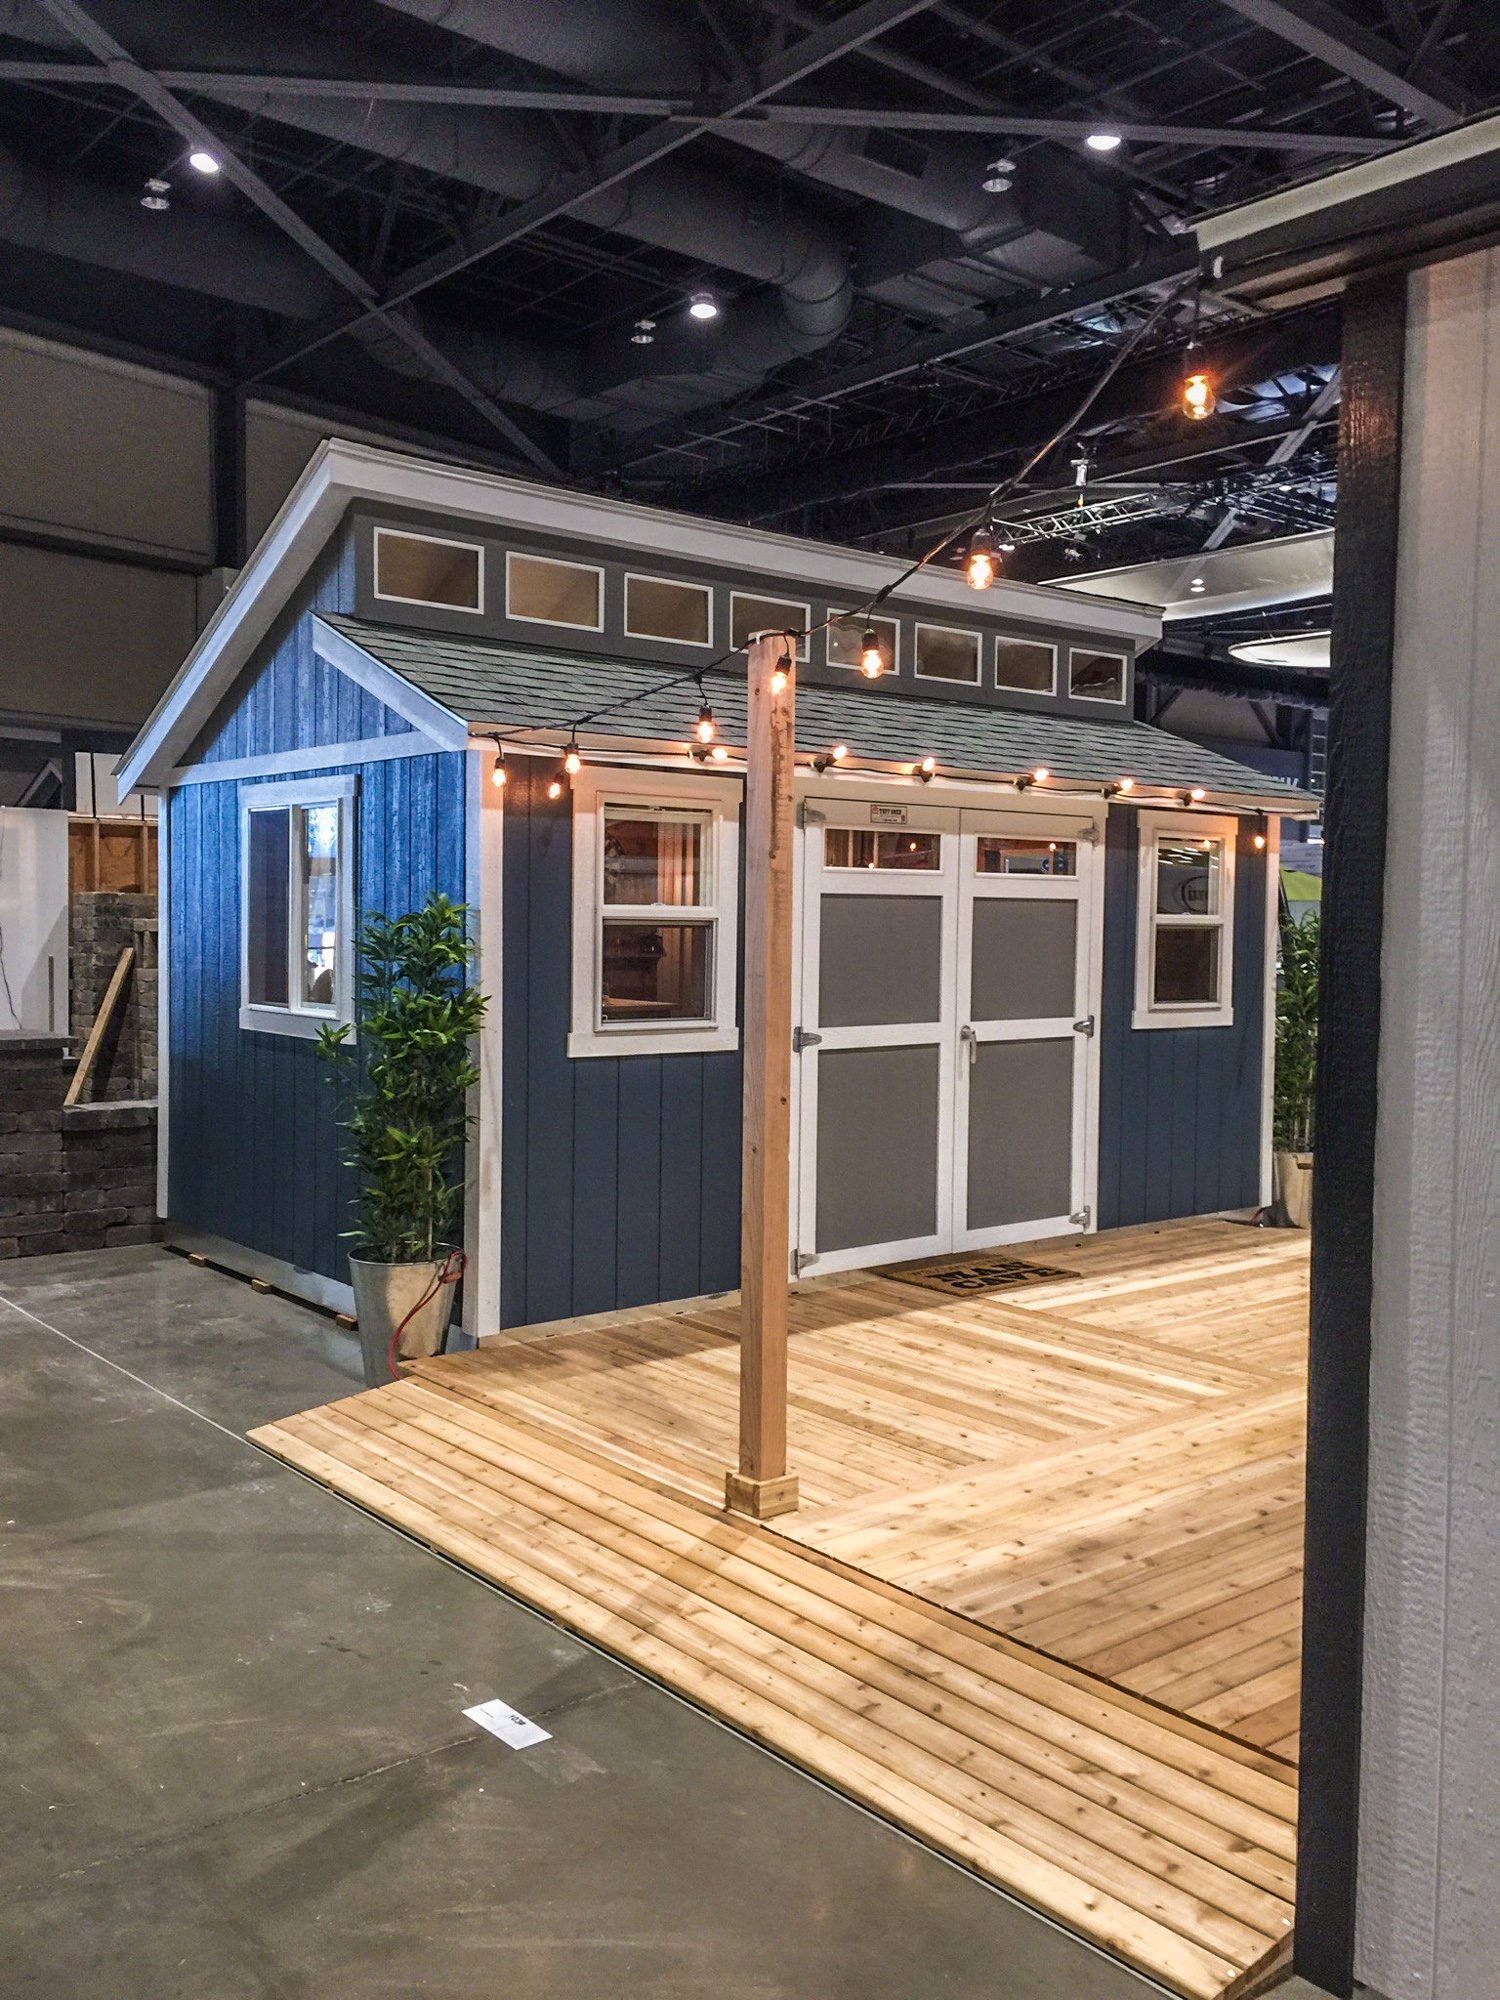 introducing our newest options - tuff shed